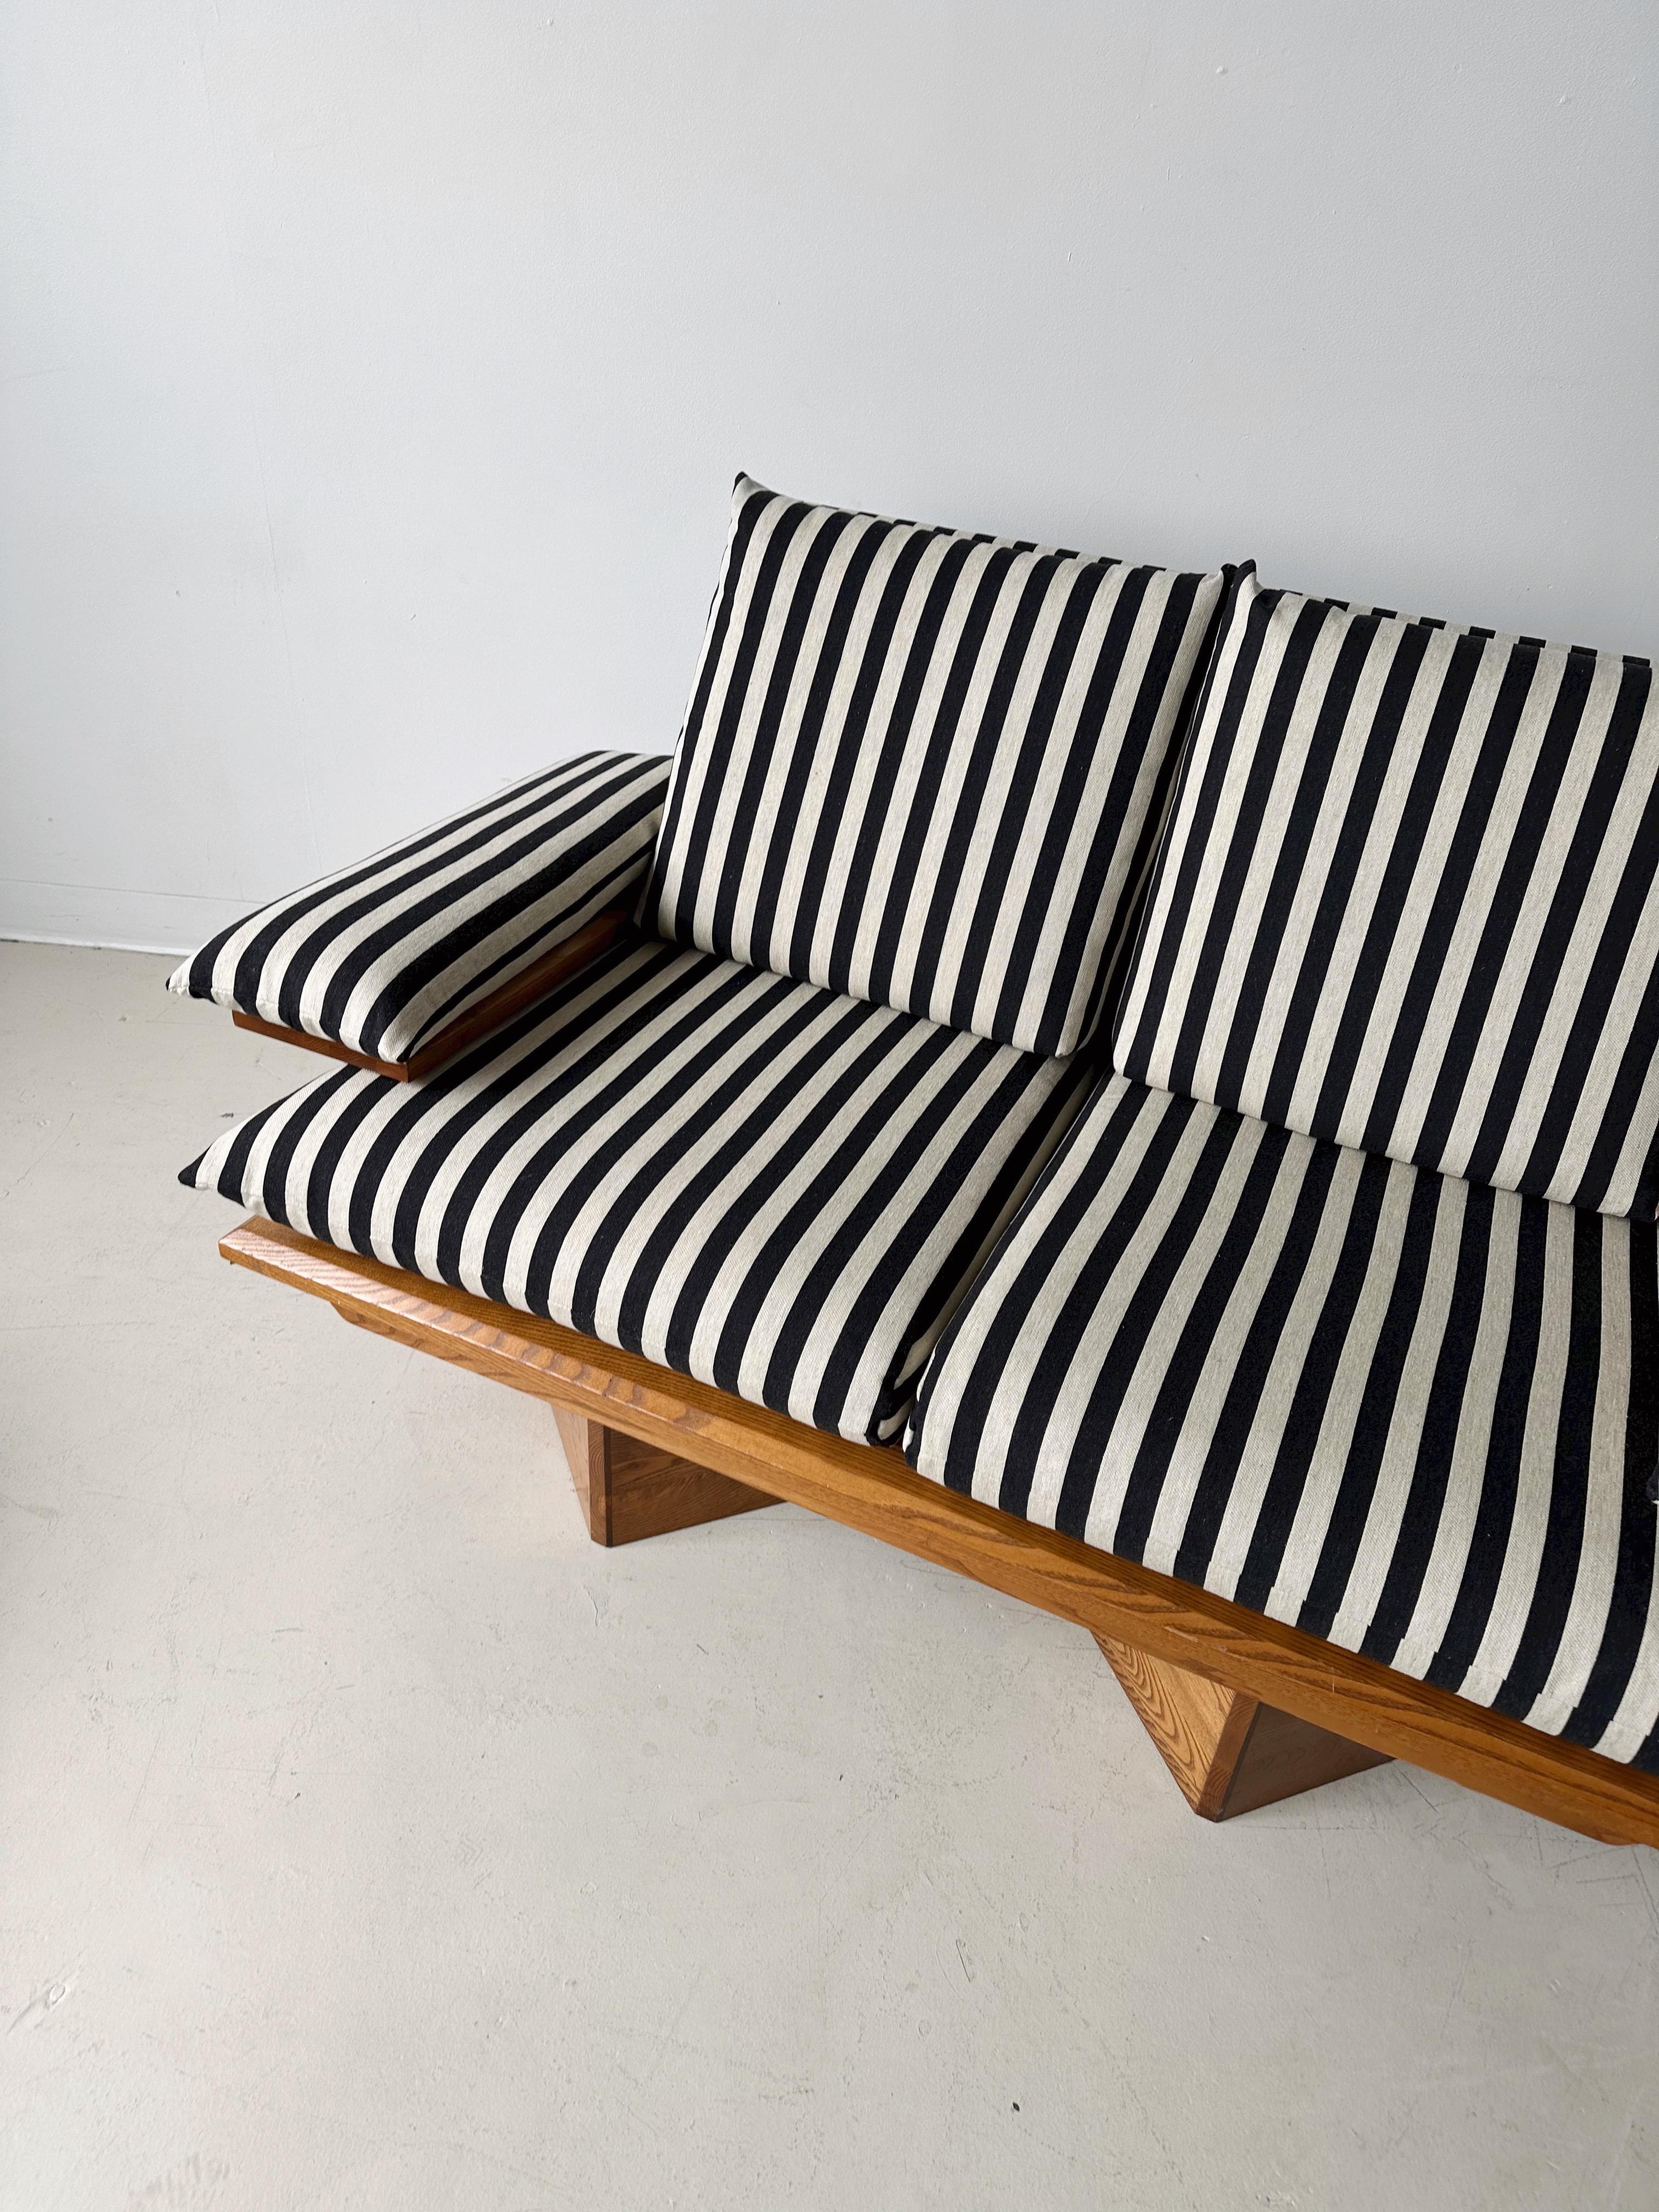 North American Striped Loveseat with Pine Frame